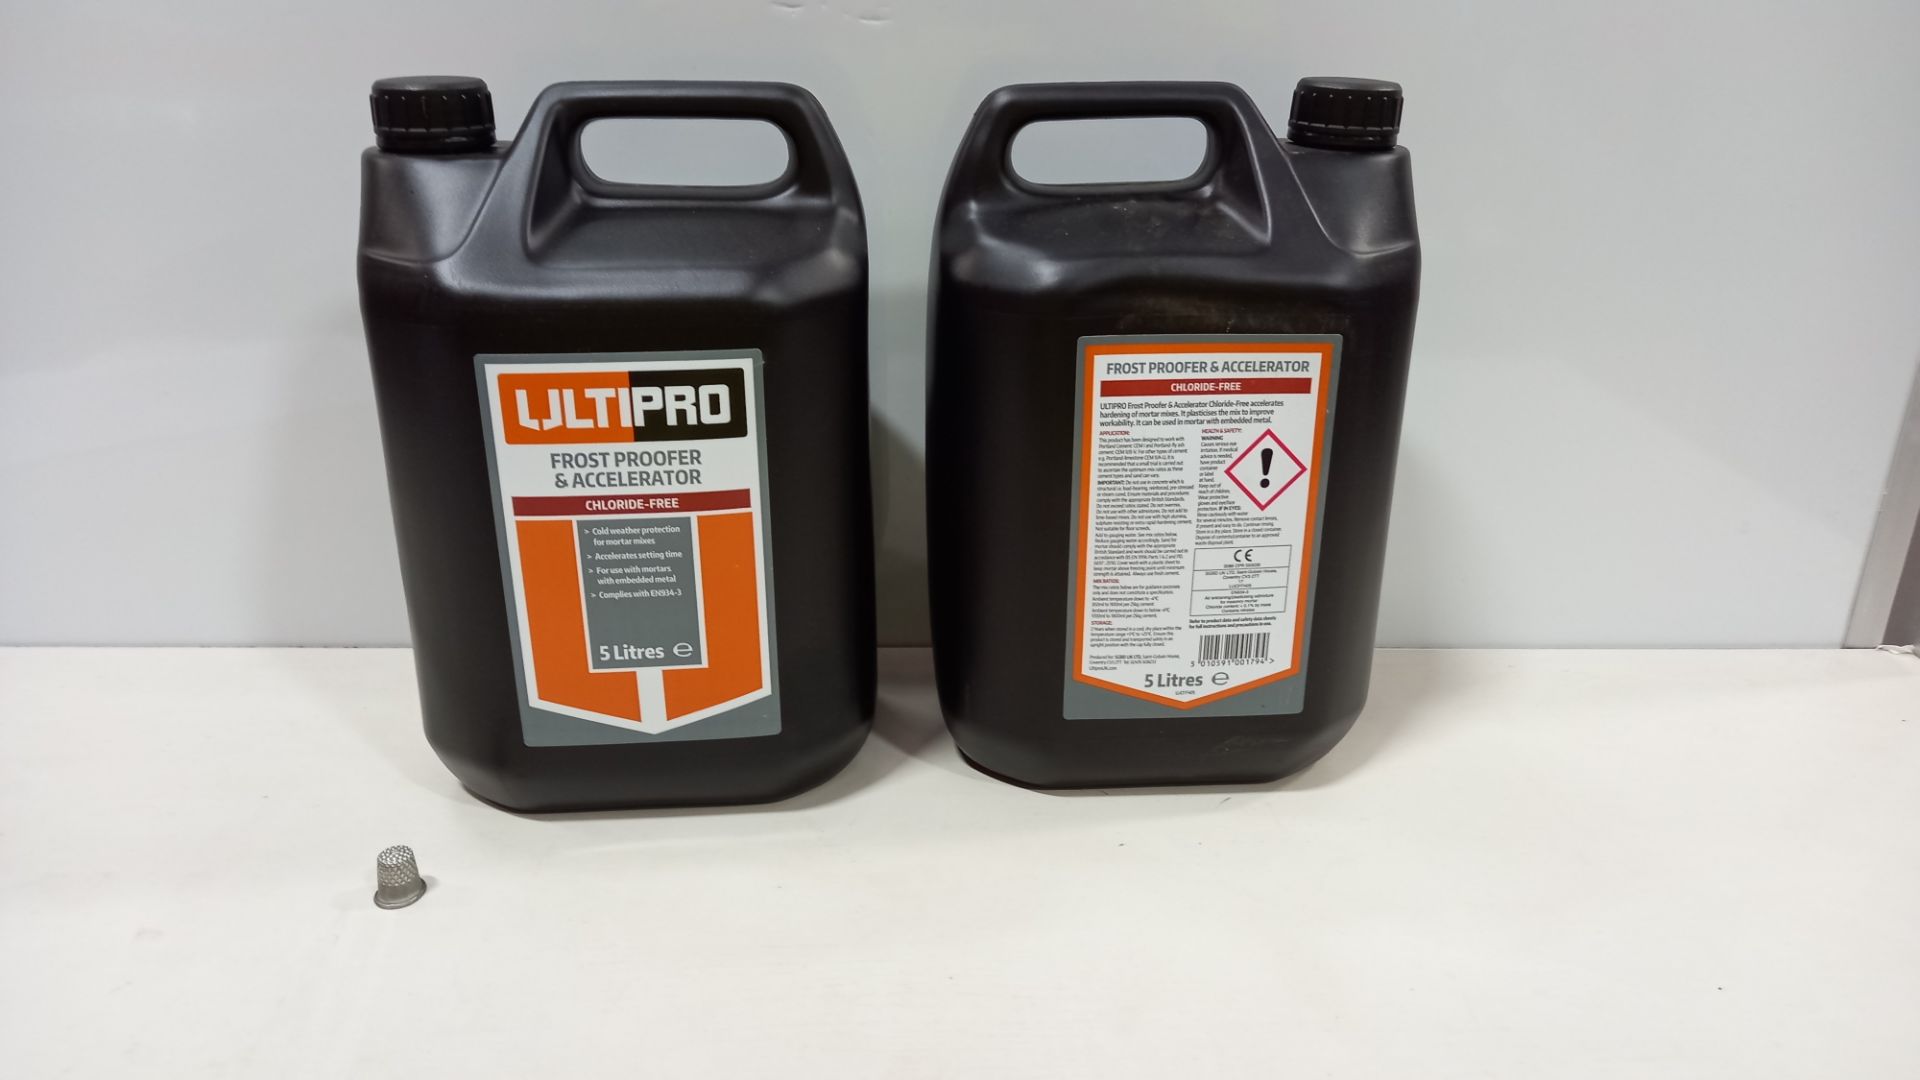 60 X BRAND NEW ULTIPRO FROST PROOFER & ACCELERATOR (5 LITRES) - IN 15 BOXES